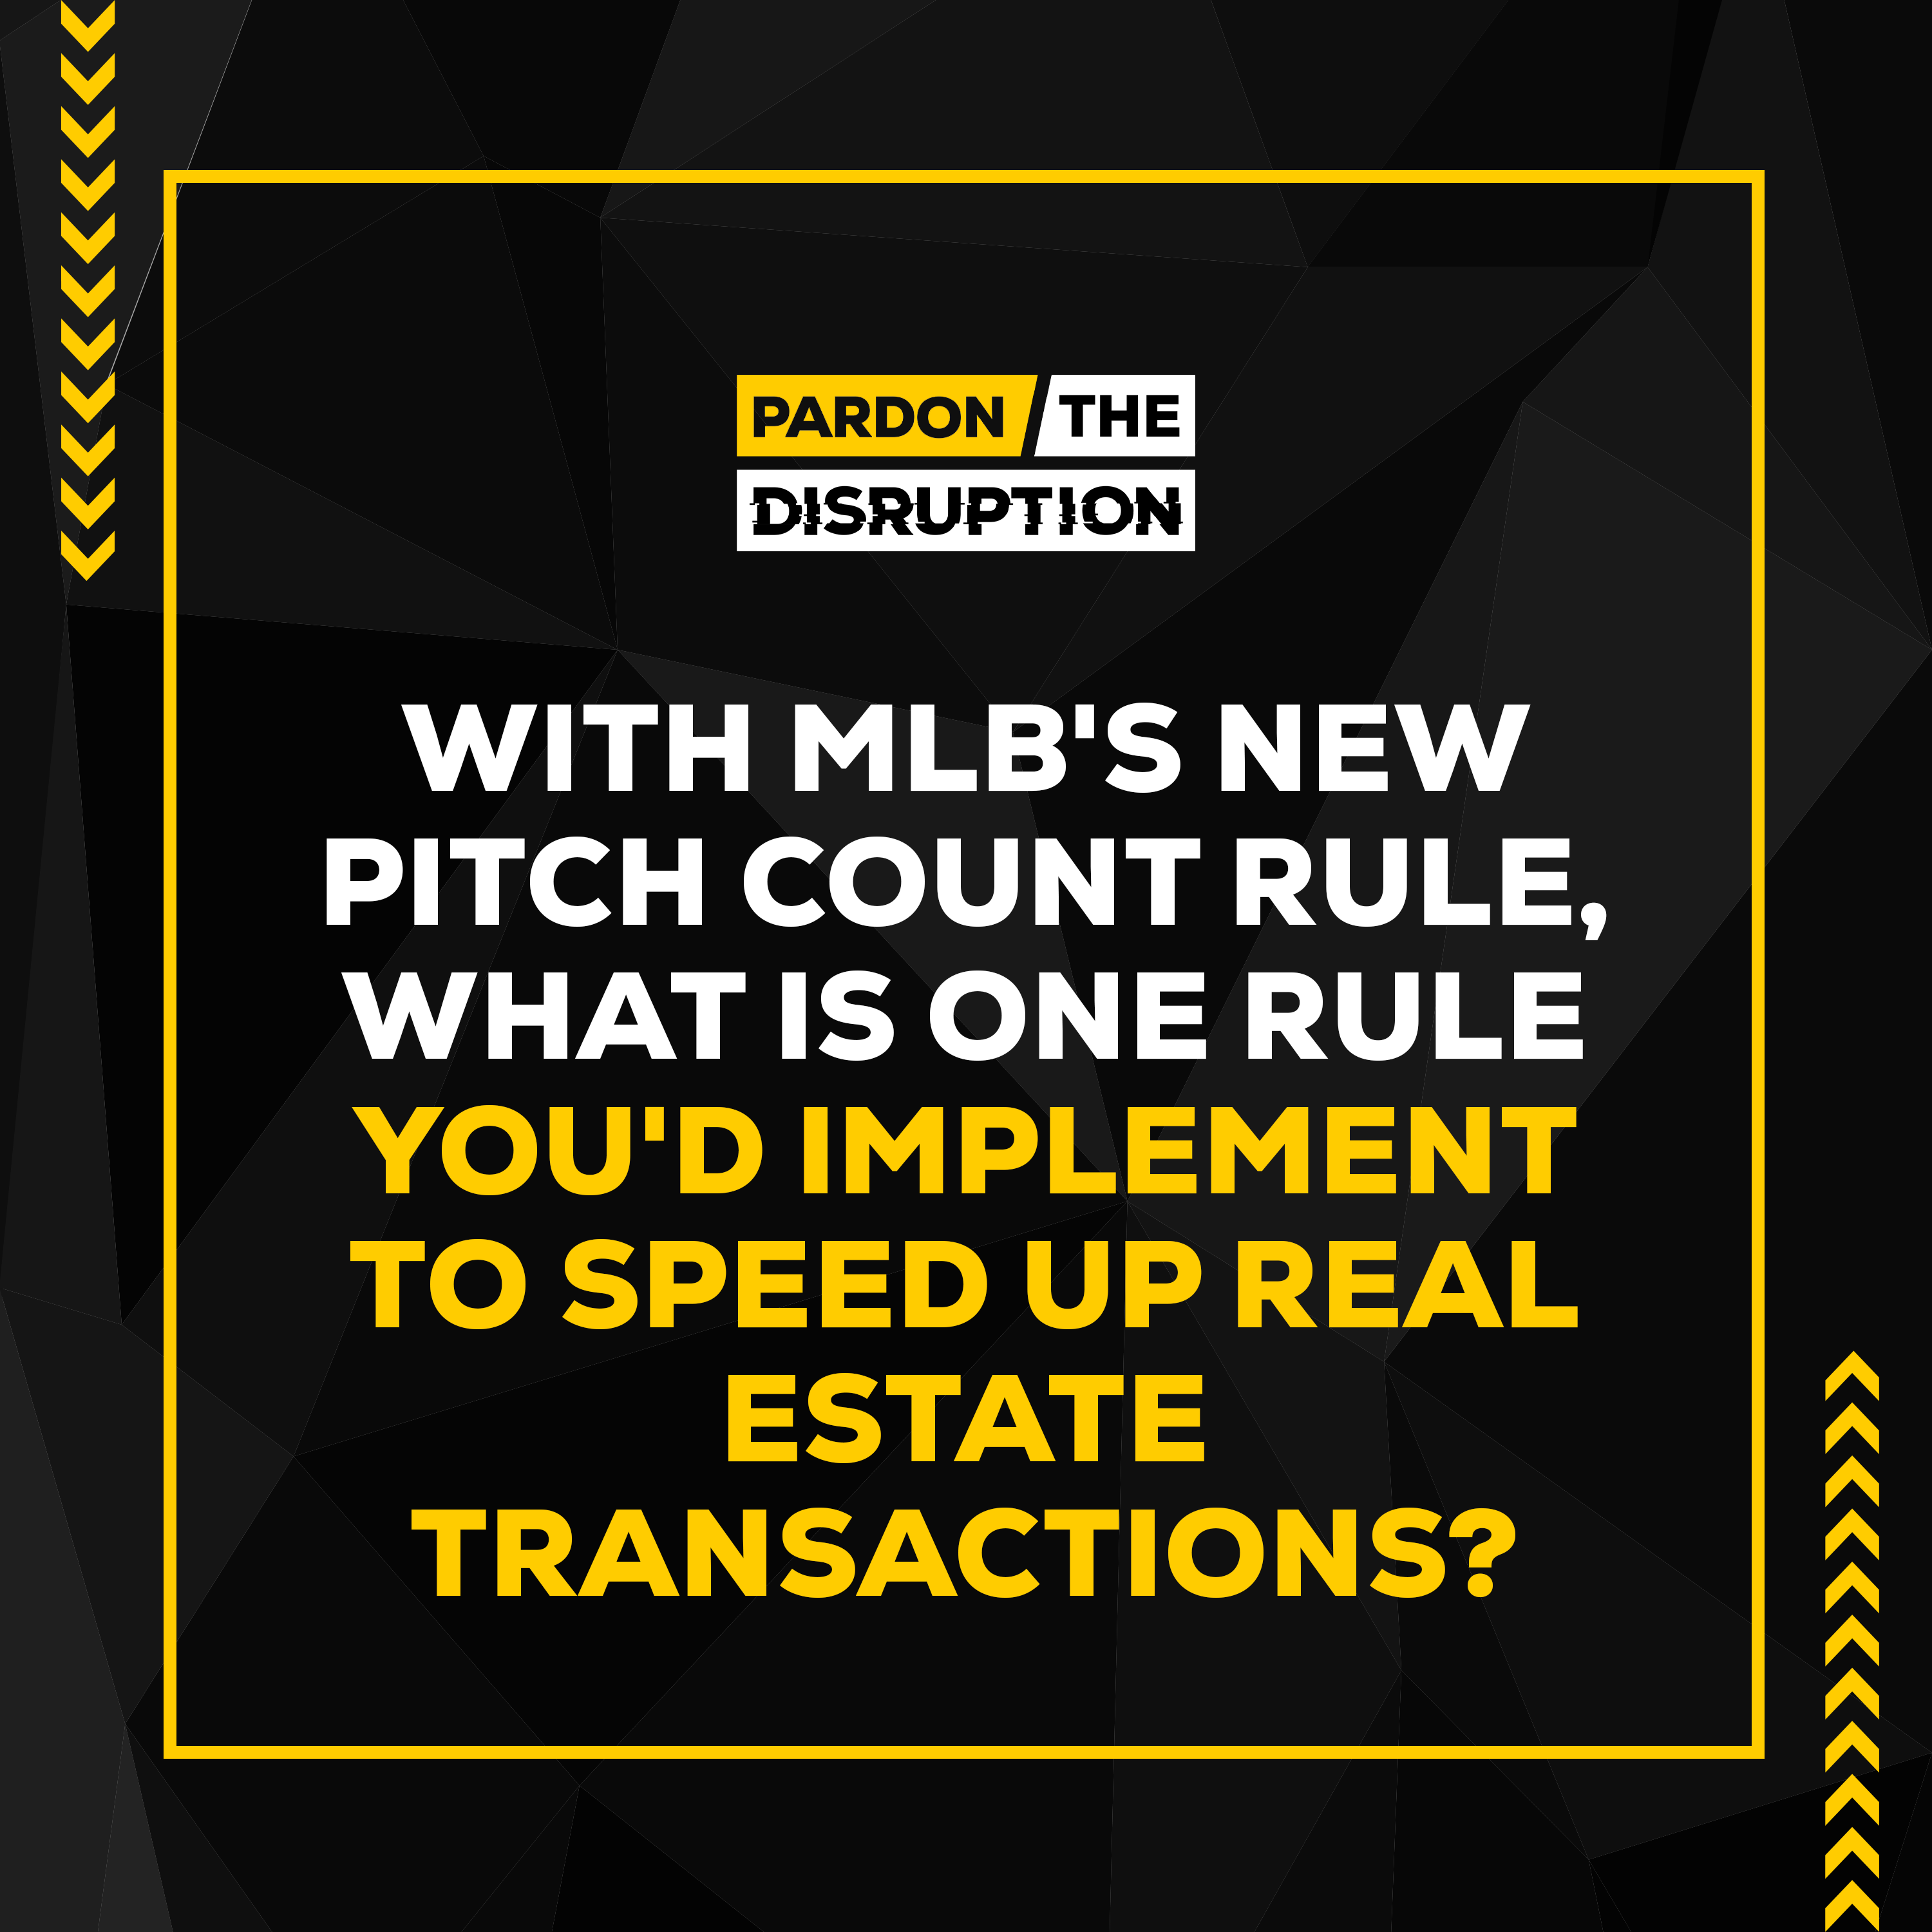 MLB's new pitch count rule, what is one rule you'd implement to speed up real estate transactions?